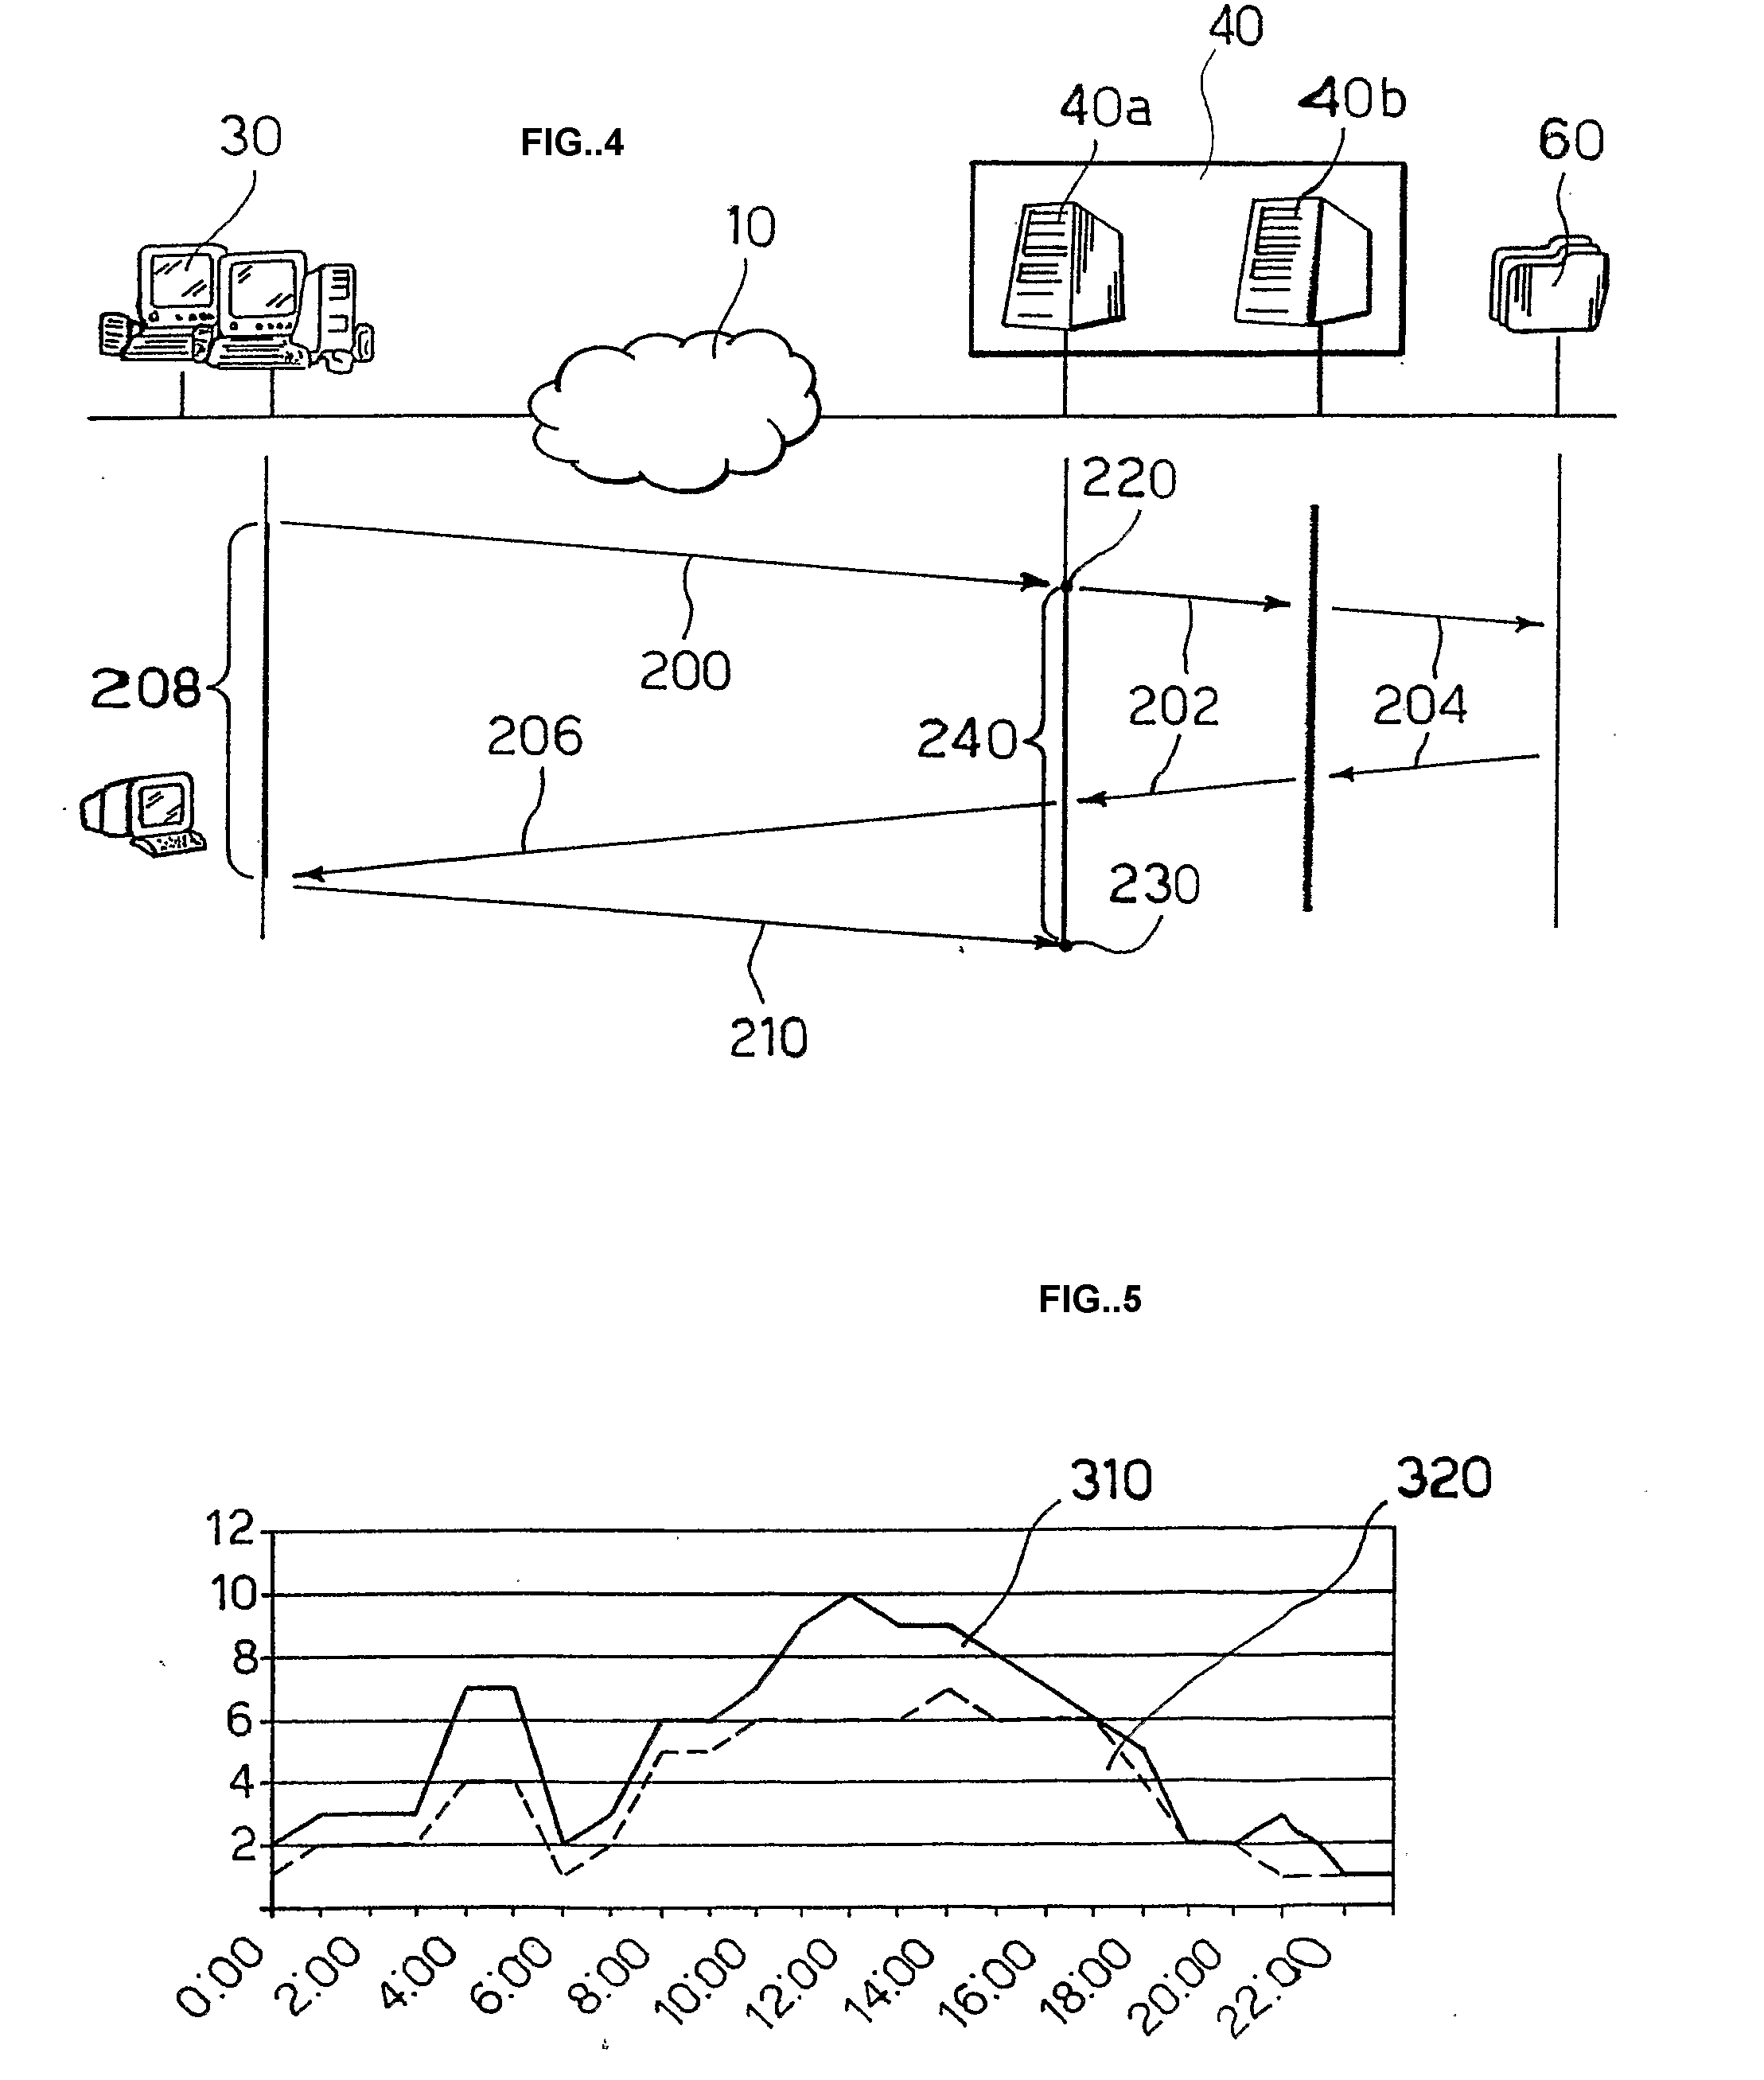 Method And System For Monitoring Performance Of A Client-Server Architecture